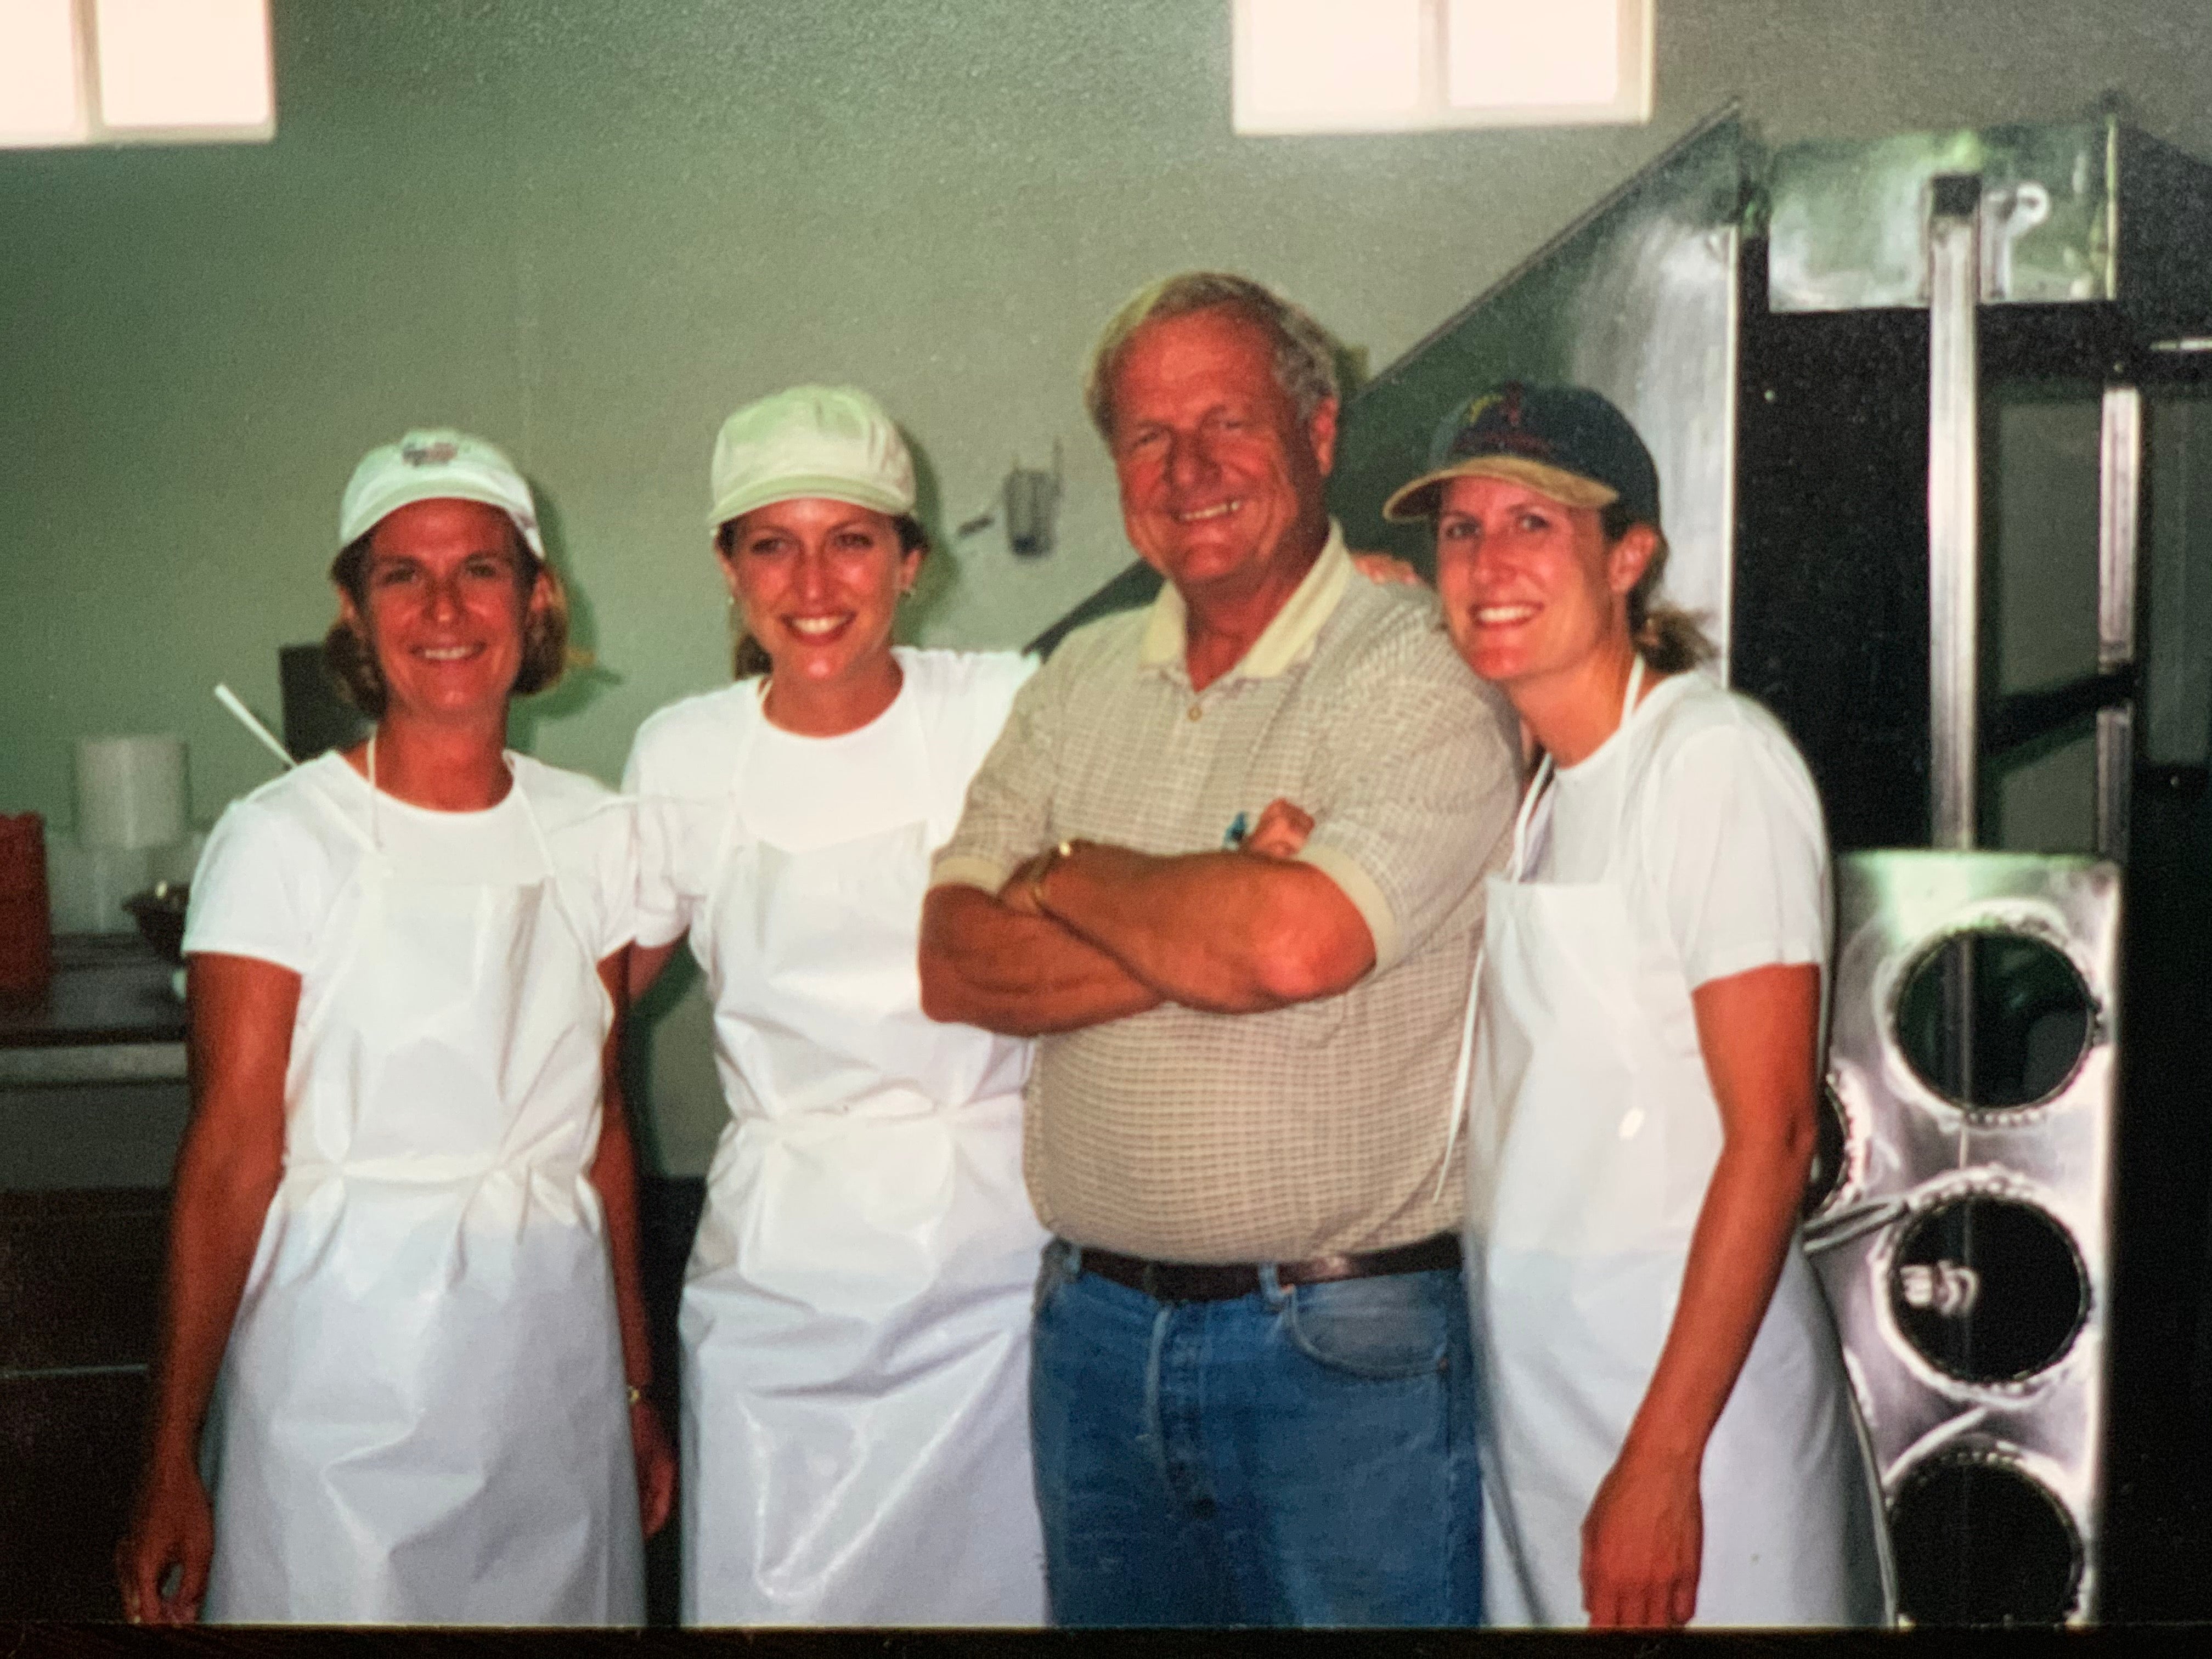 karen, jill, bob and lynn giacomini smiling on the first day of cheese production